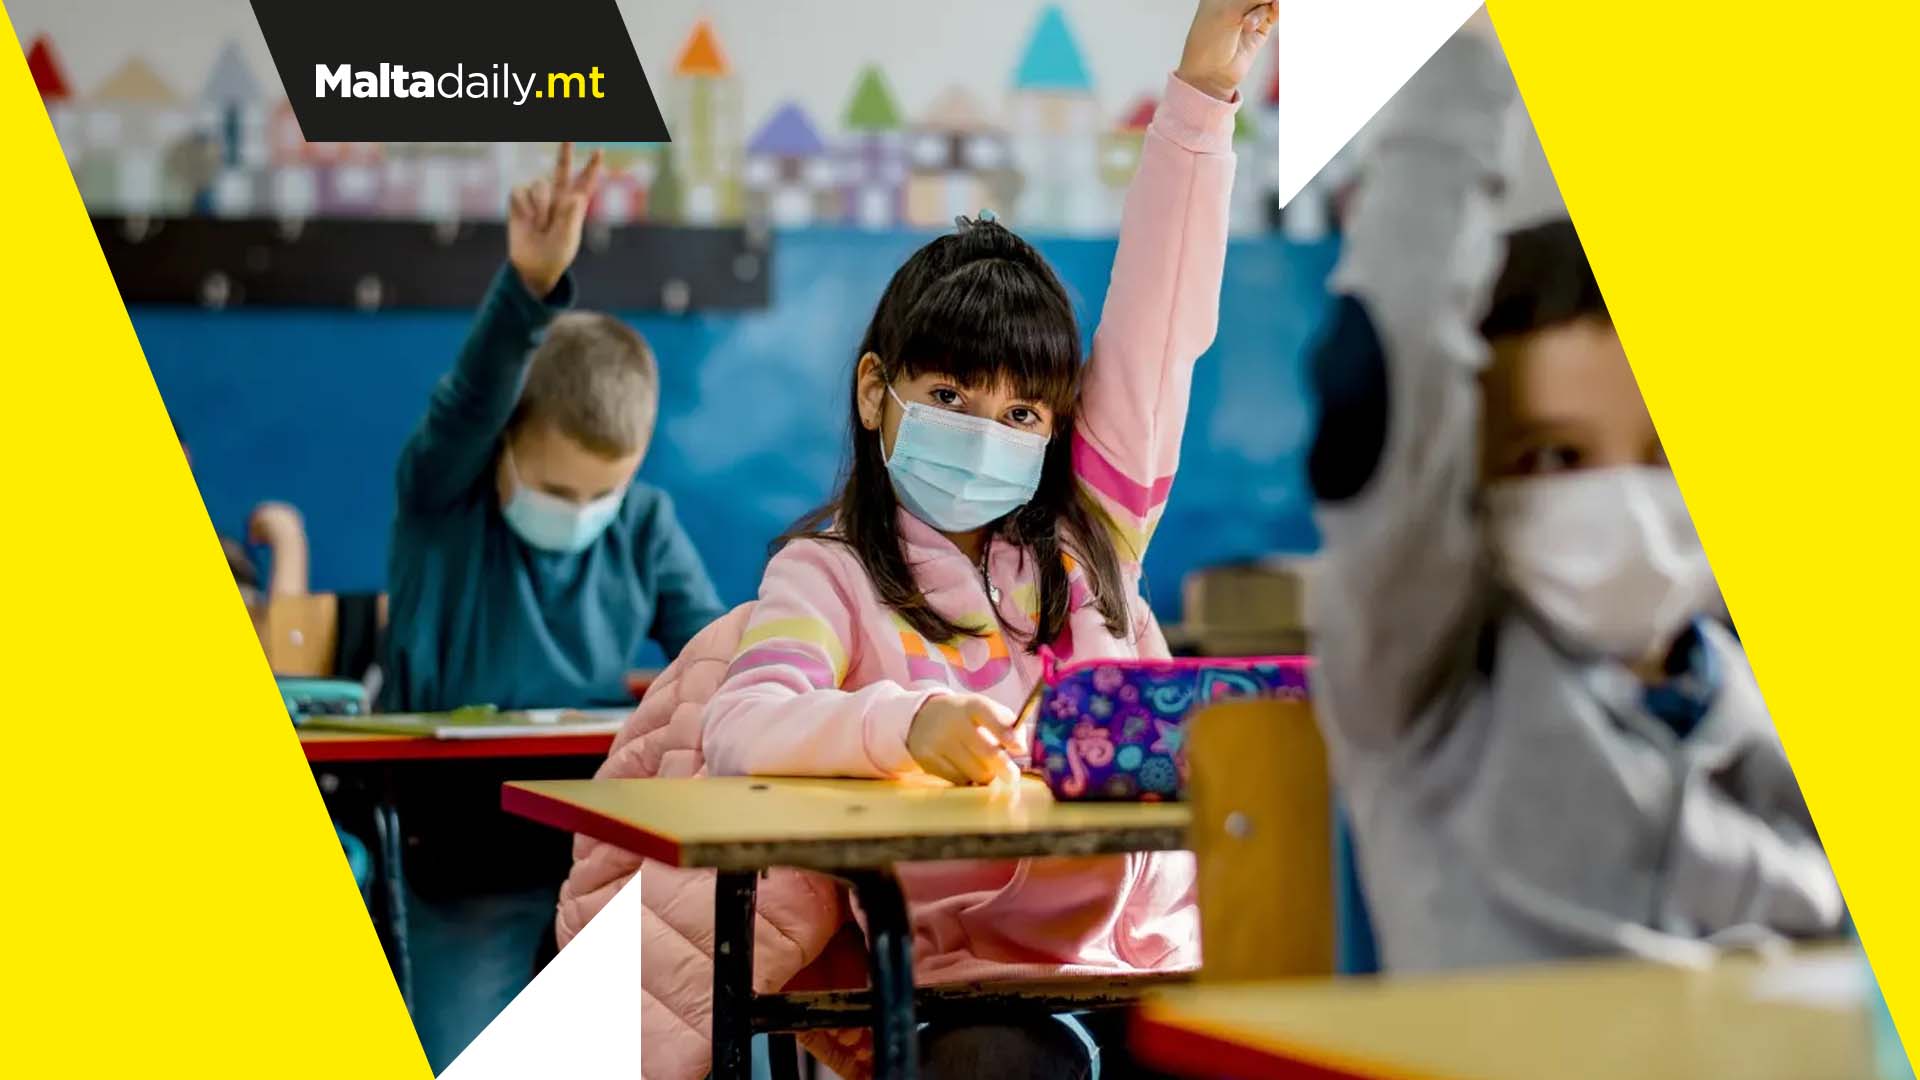 School mask guidelines officially released by health authorities